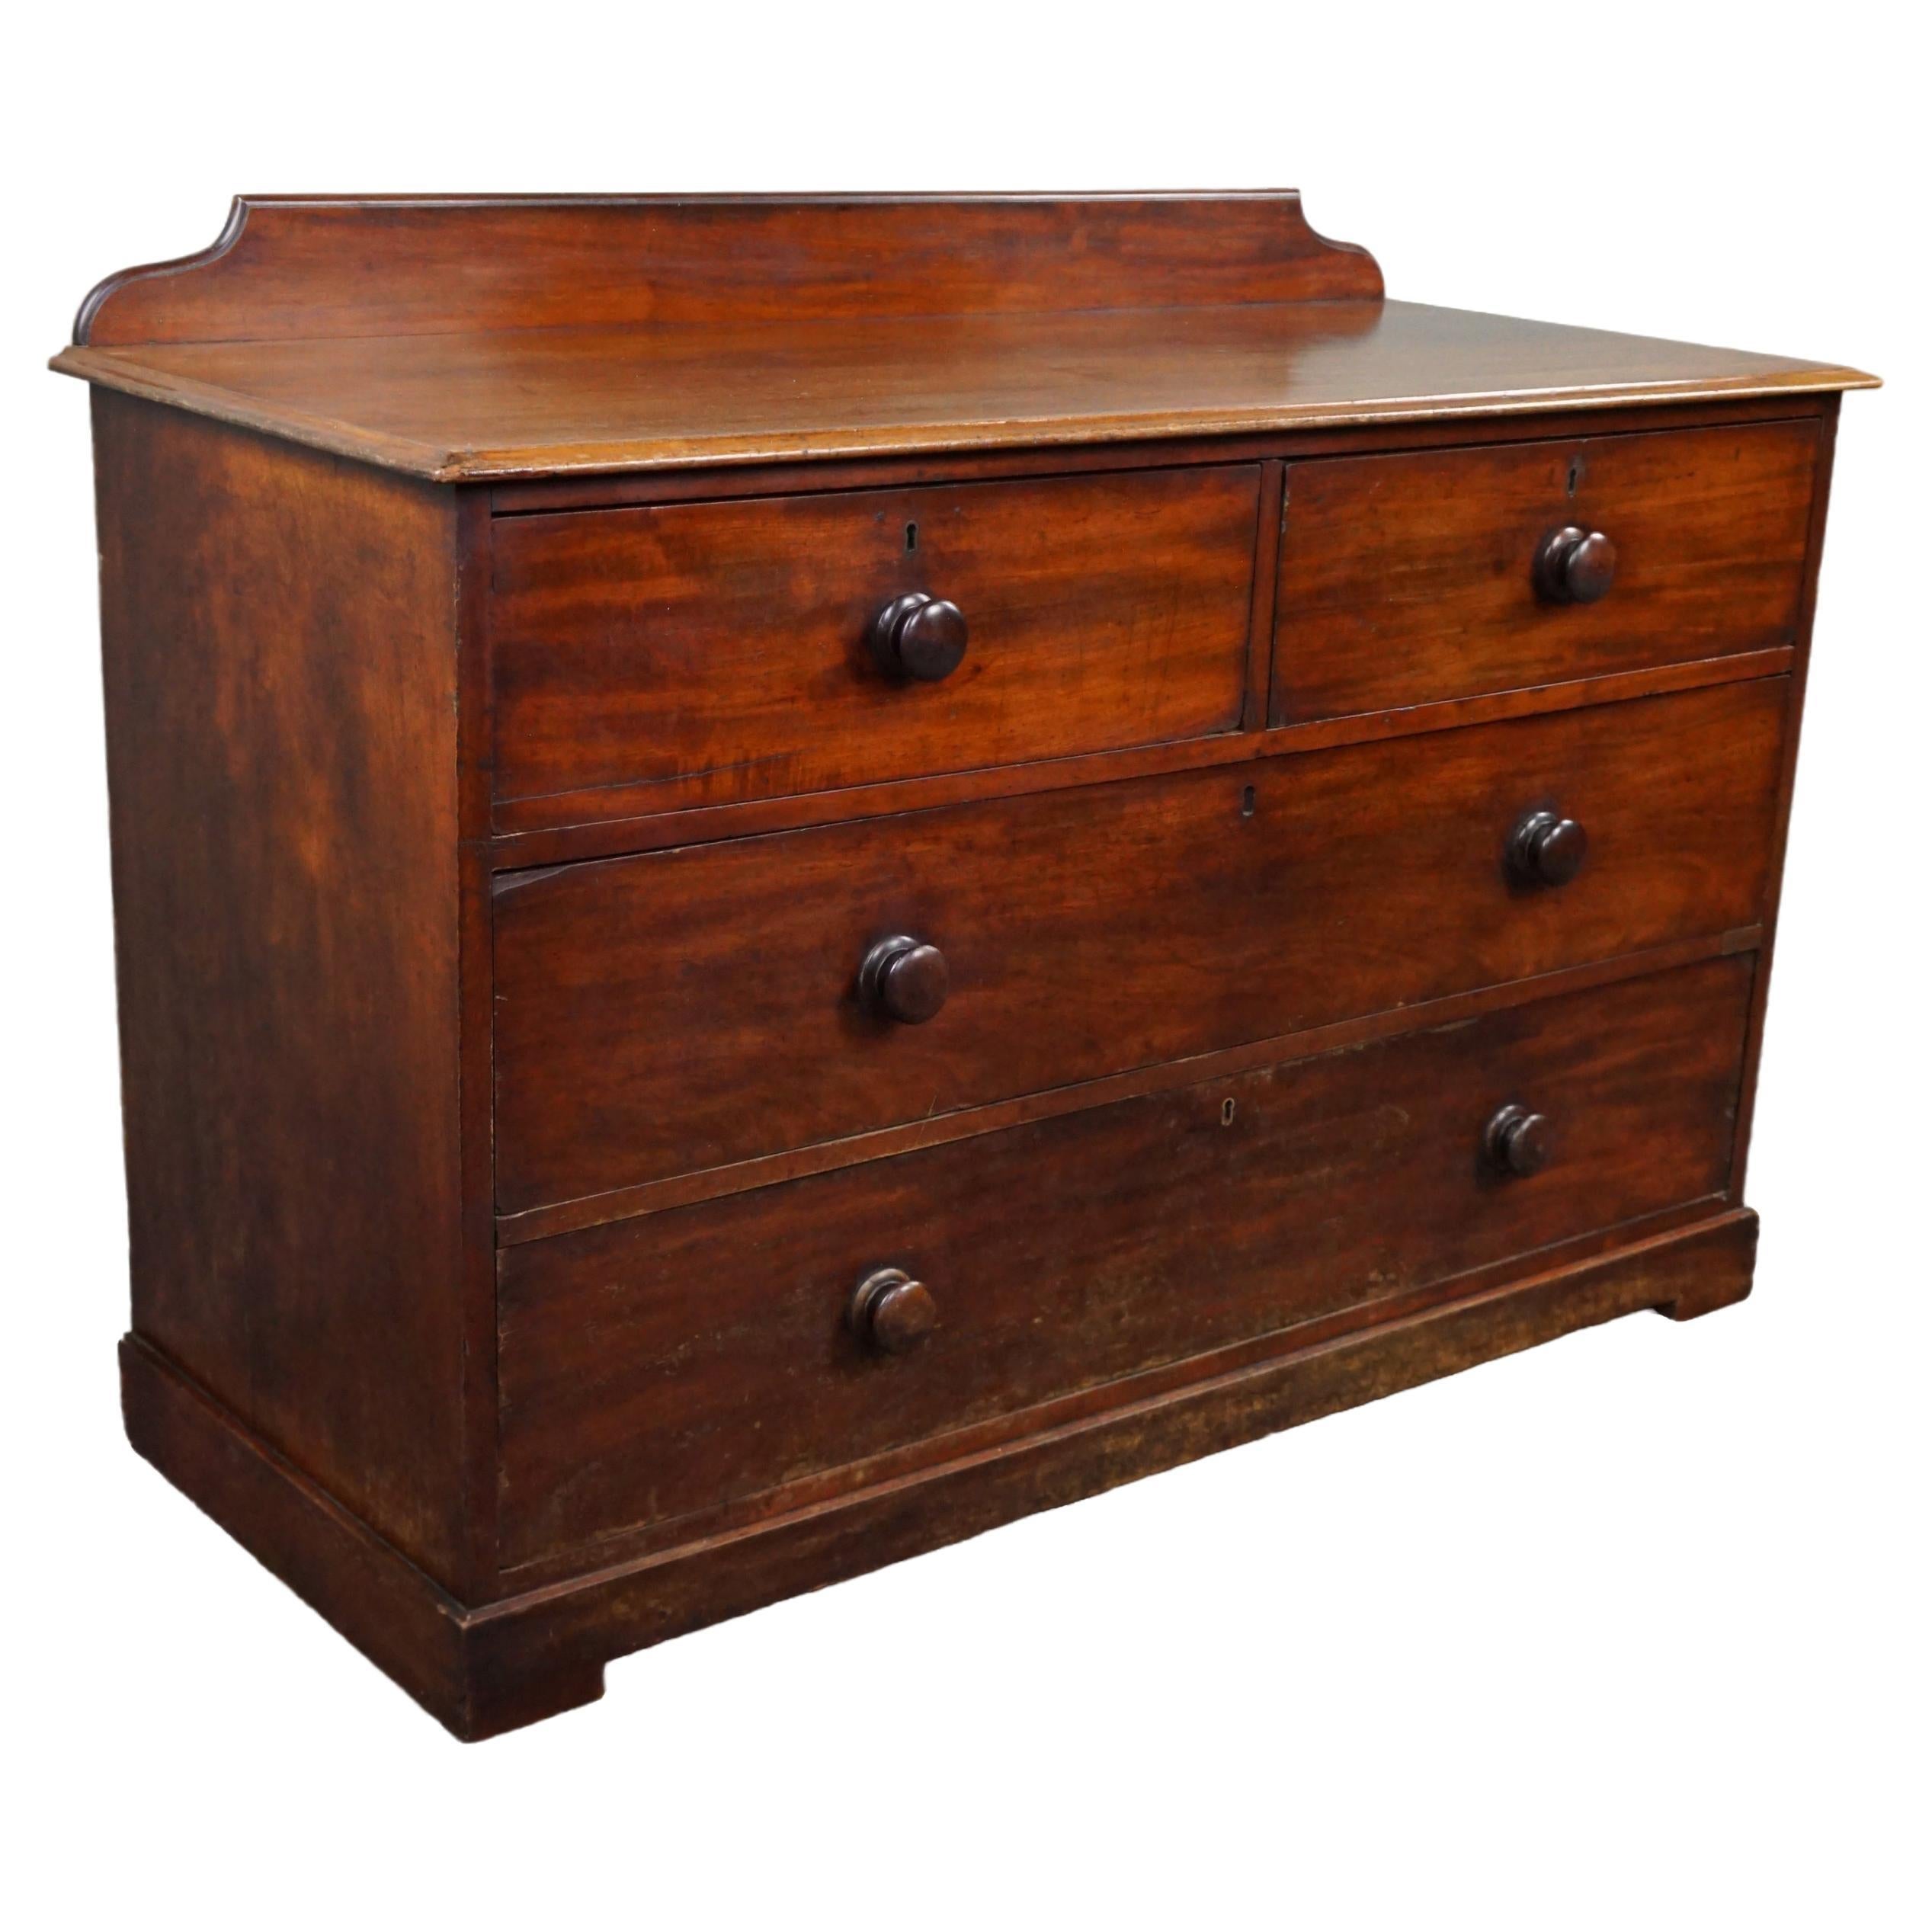 Antique English chest of drawers, mahogany, +/- 1850